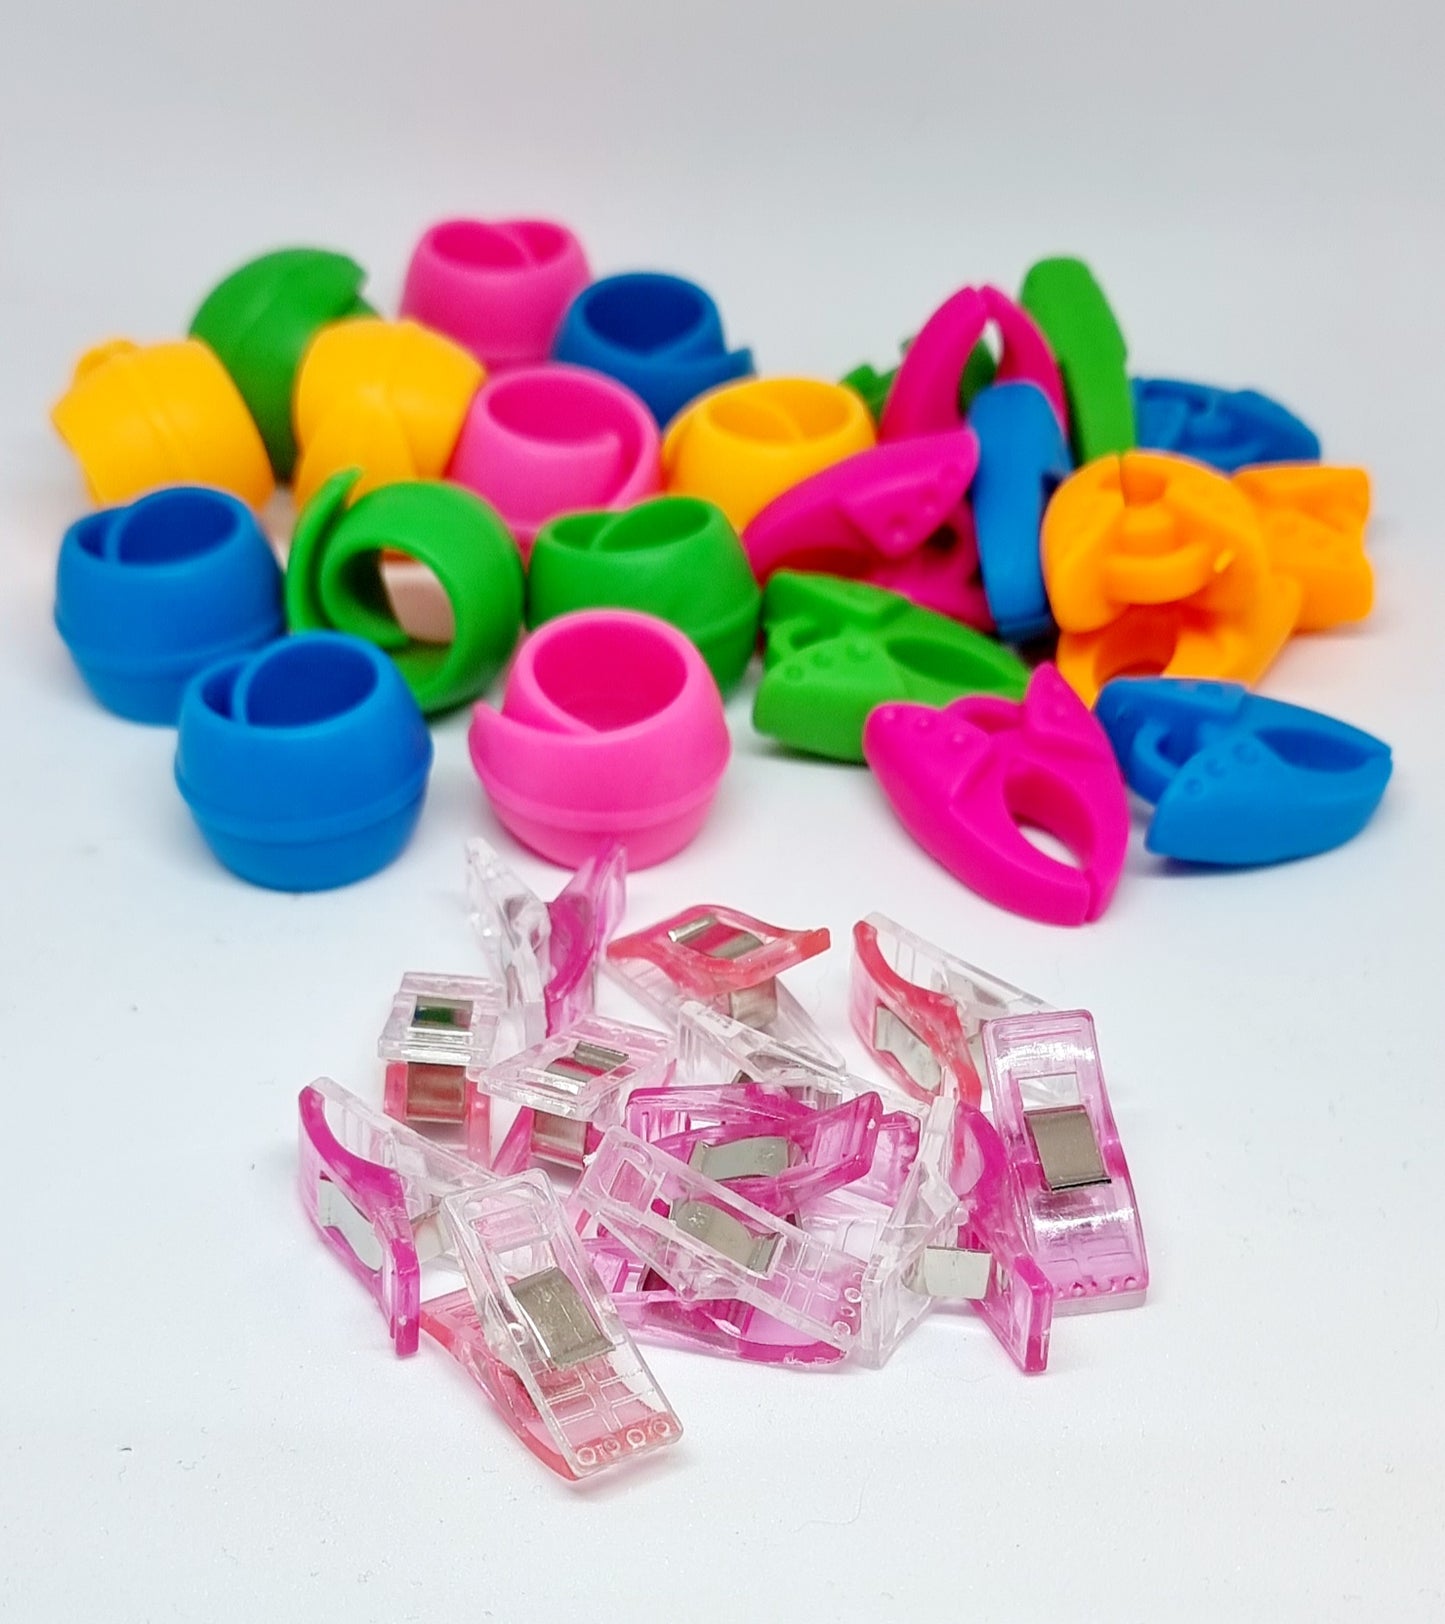 Thread Keepers. Bobbin Clamps & Sewing Clips – Handy Craft Supplies